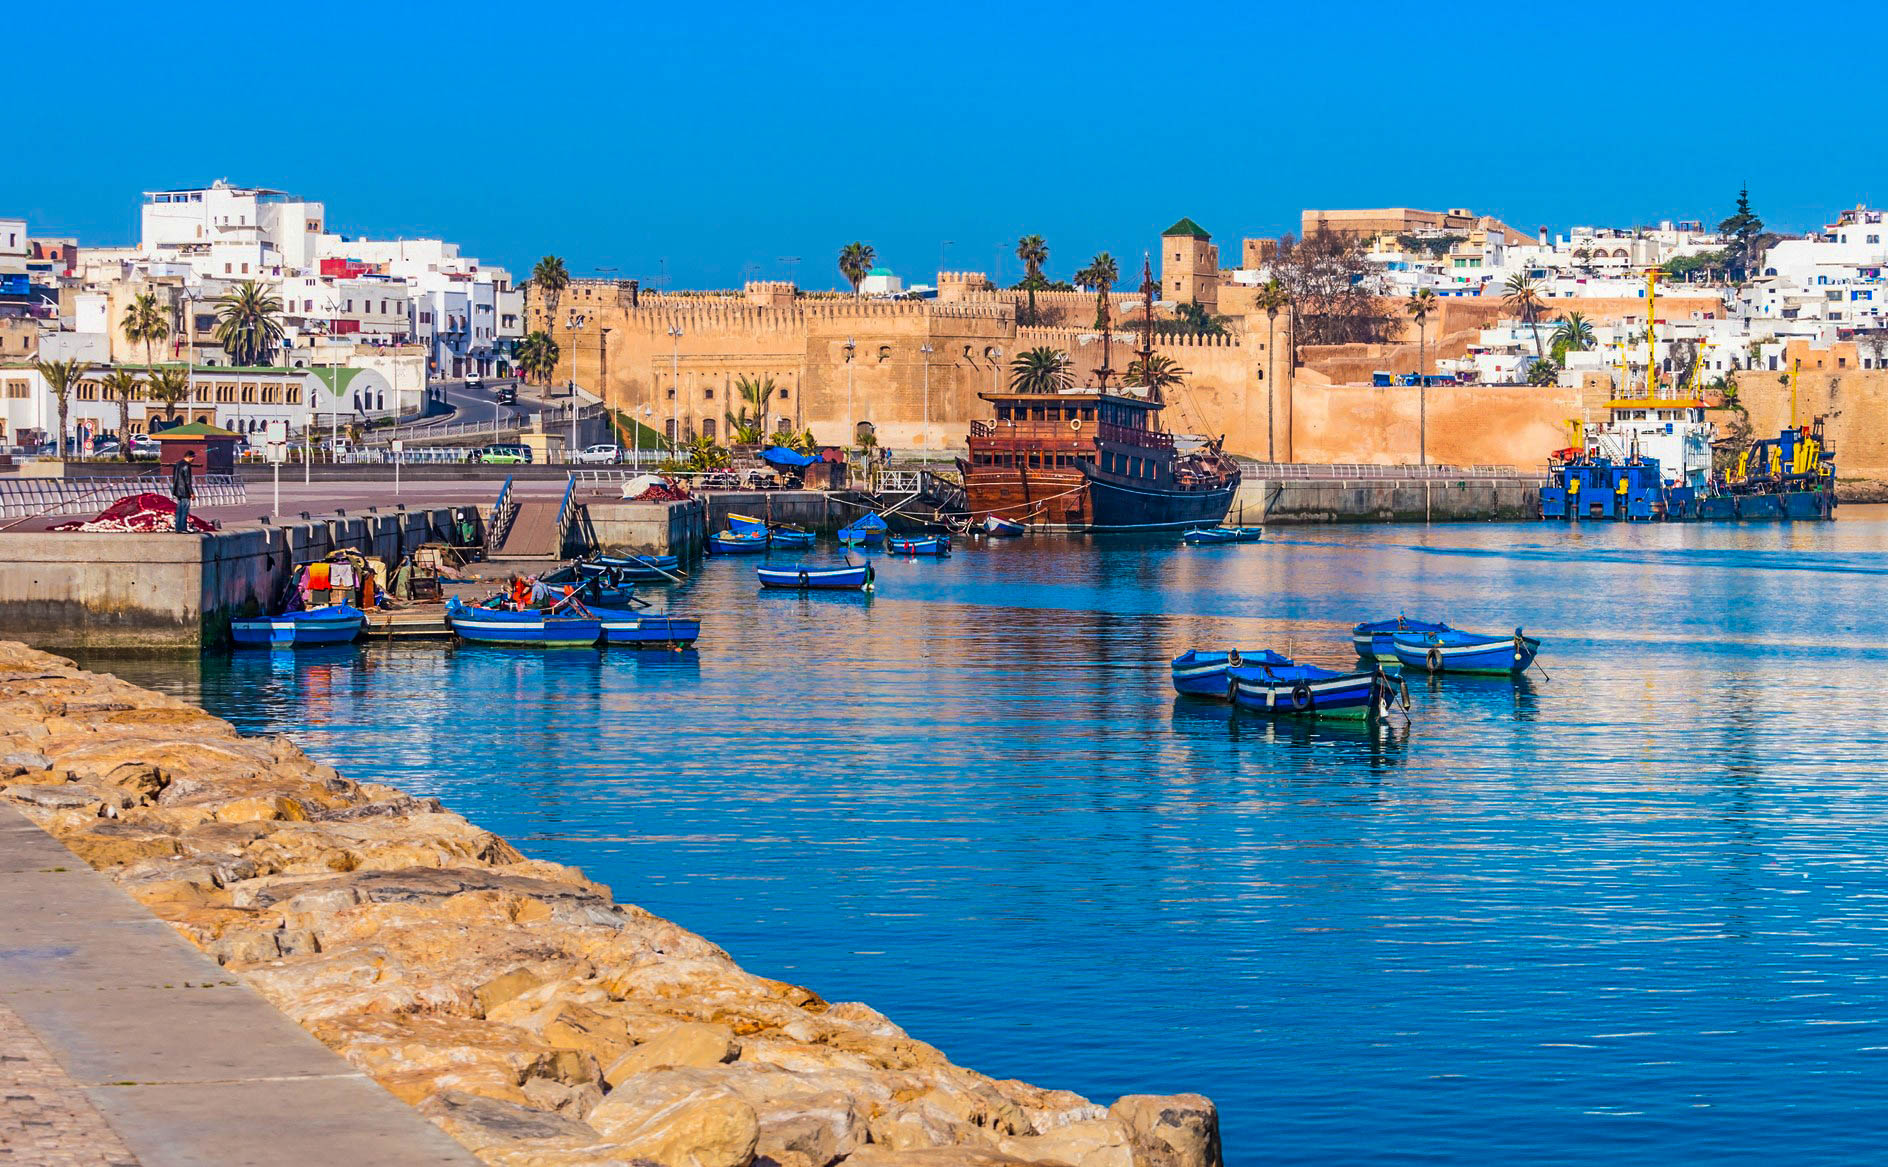 River Bou Regreg seafront and Kasbah in medina of Rabat, Morocco. Rabat is the capital of Morocco. Rabat is located on the Atlantic Ocean at the mouth of the river Bou Regreg.